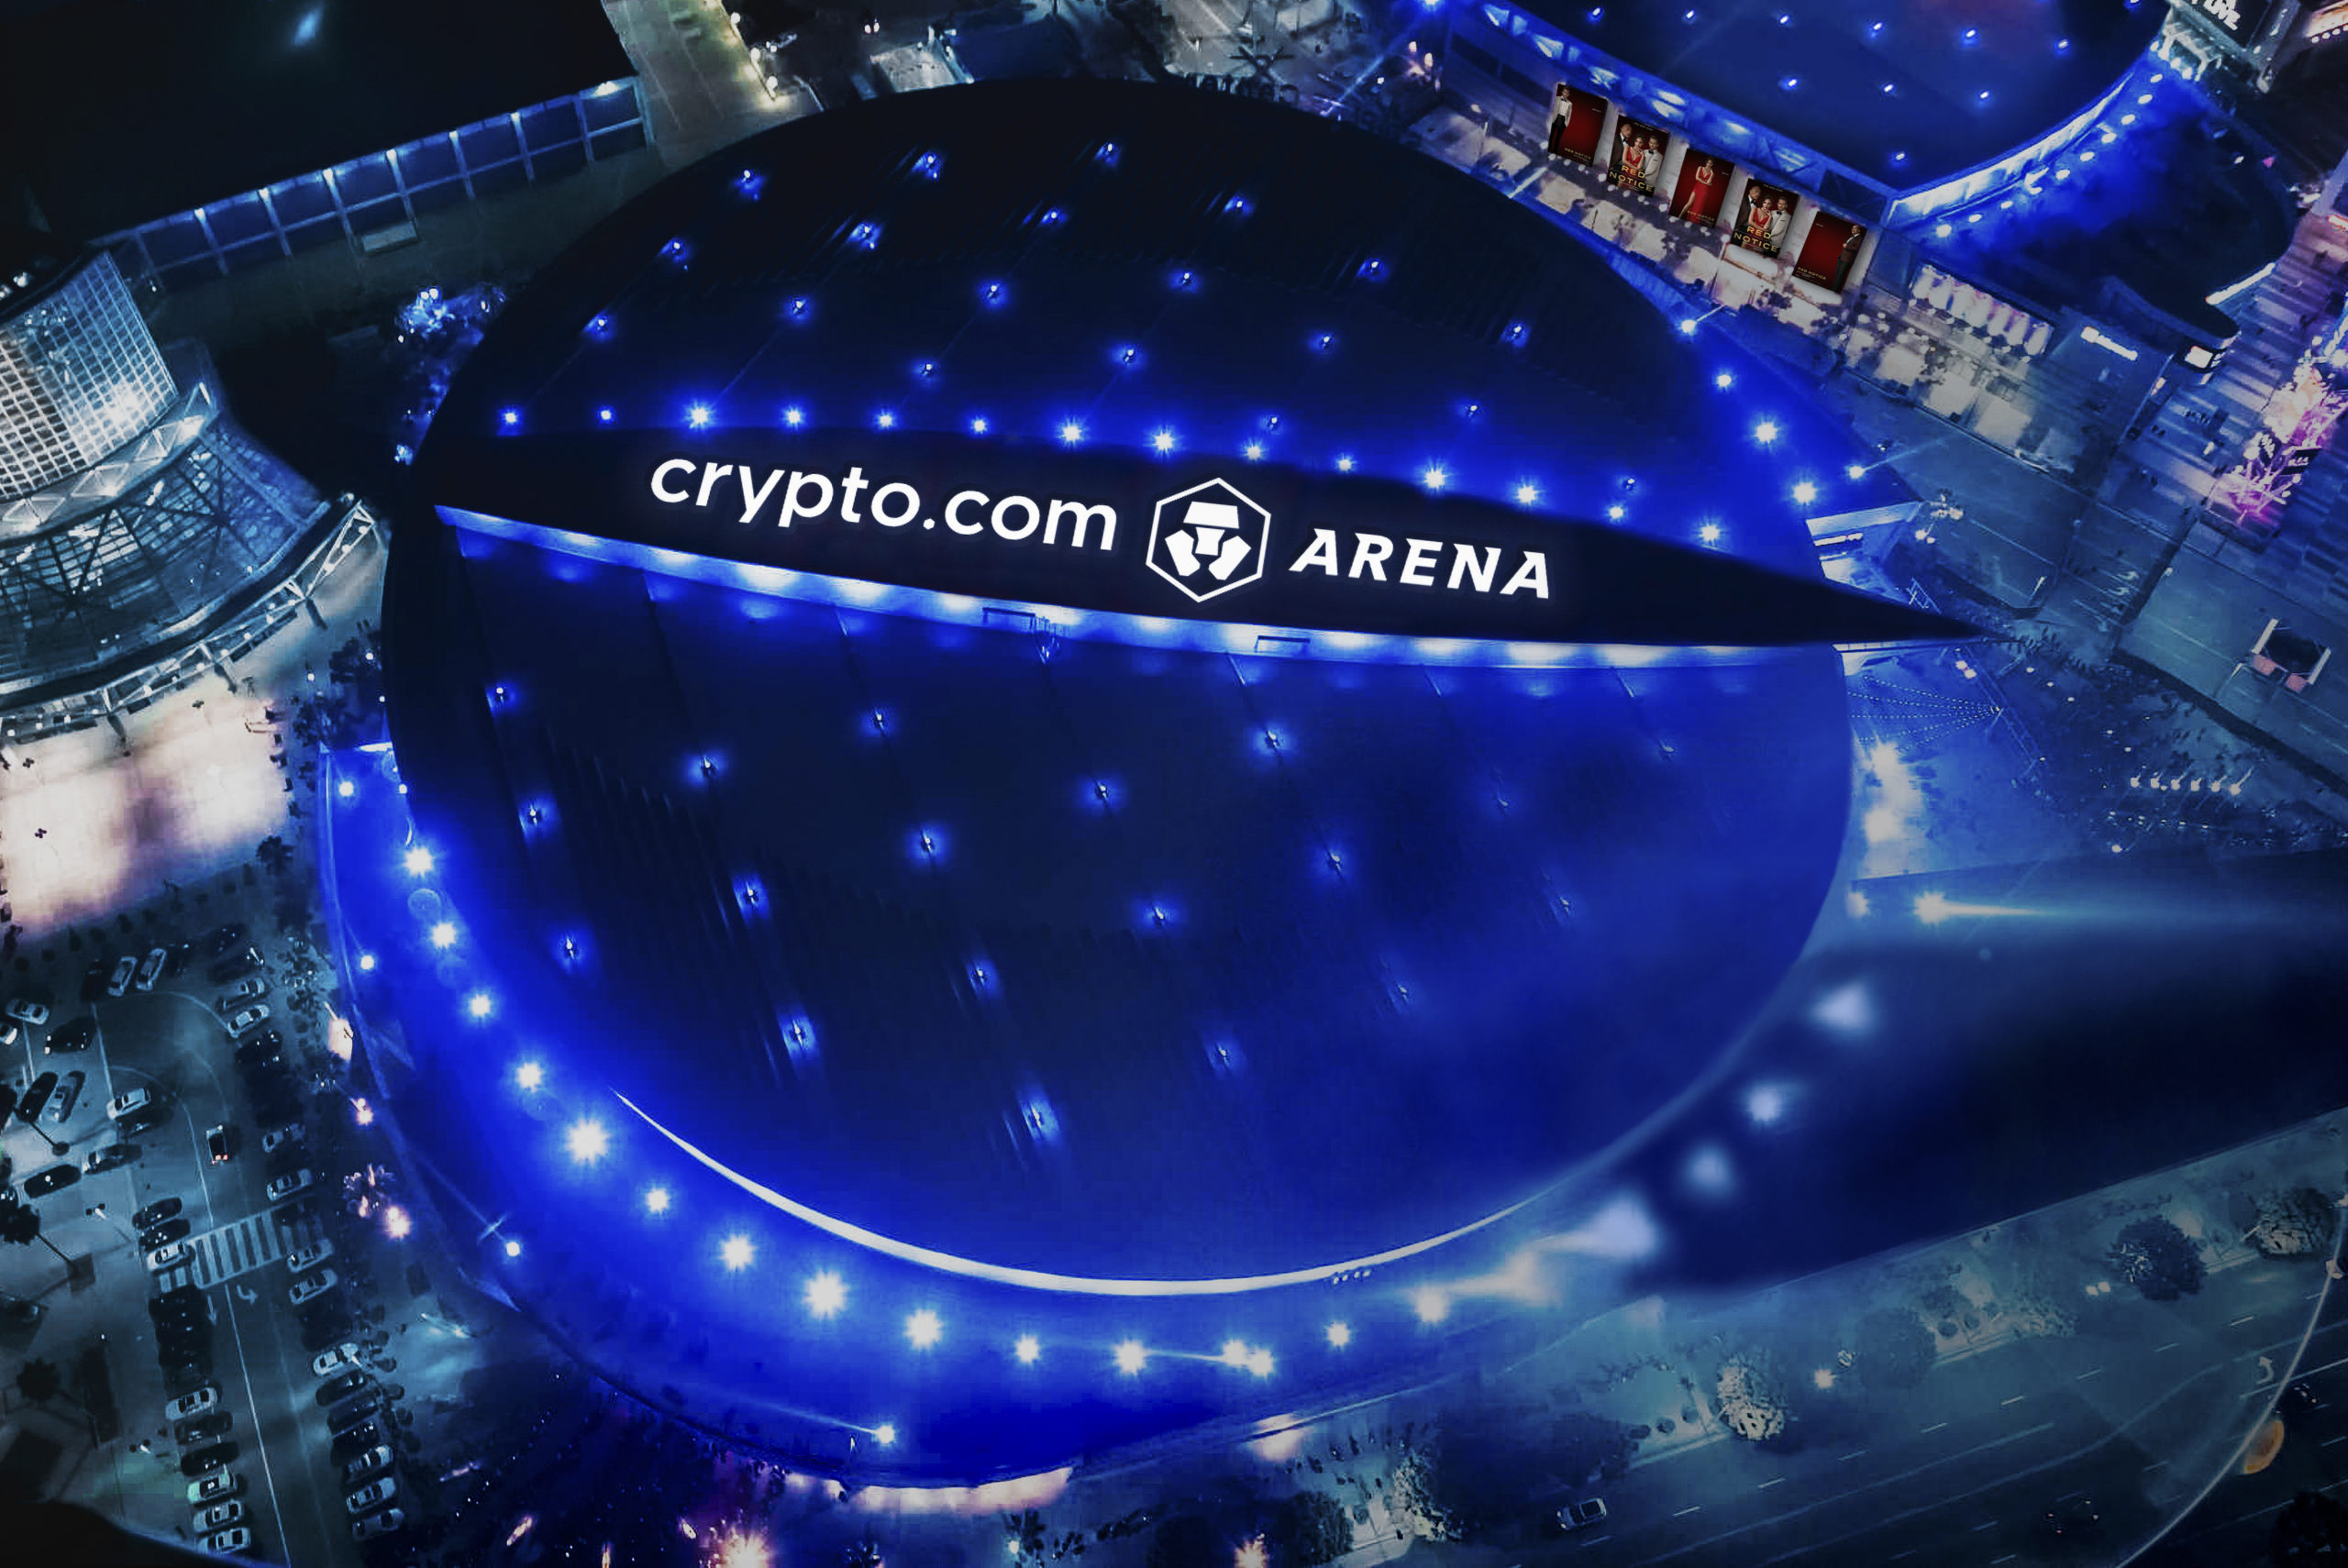 Staples Center Will Become Crypto.com Arena | What Now Los Angeles